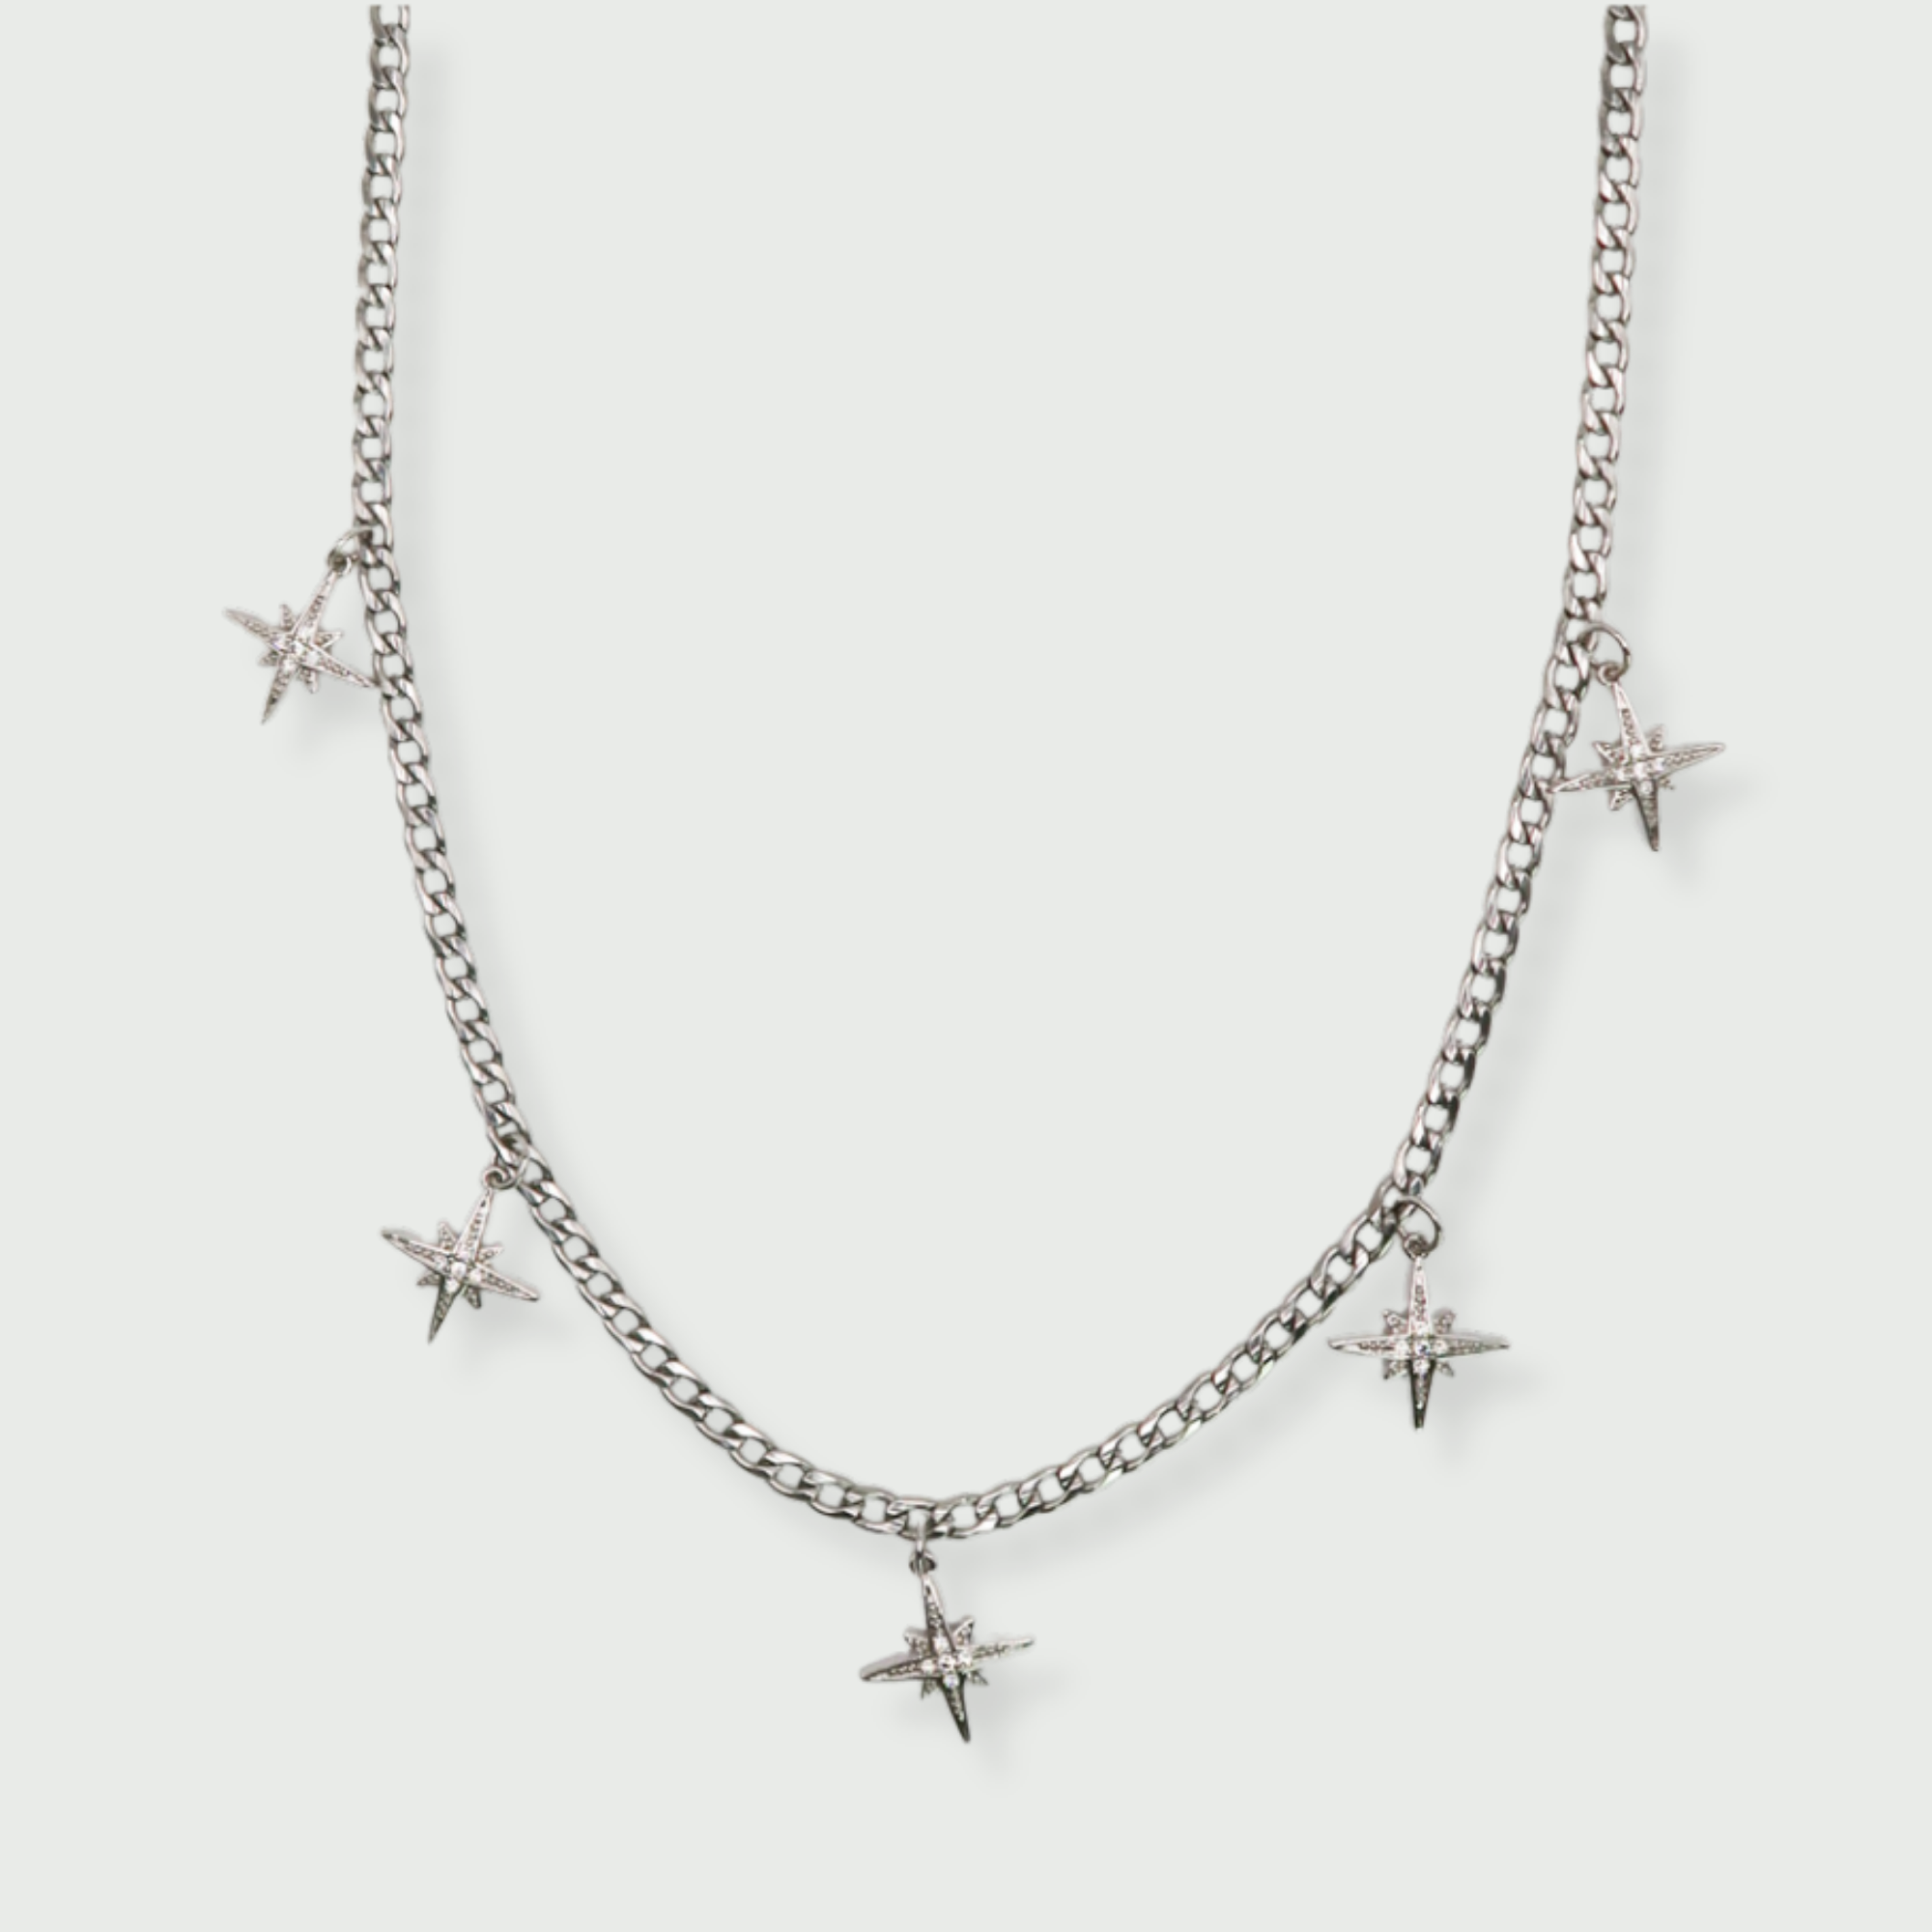 Silver Cuban Curb with star charms